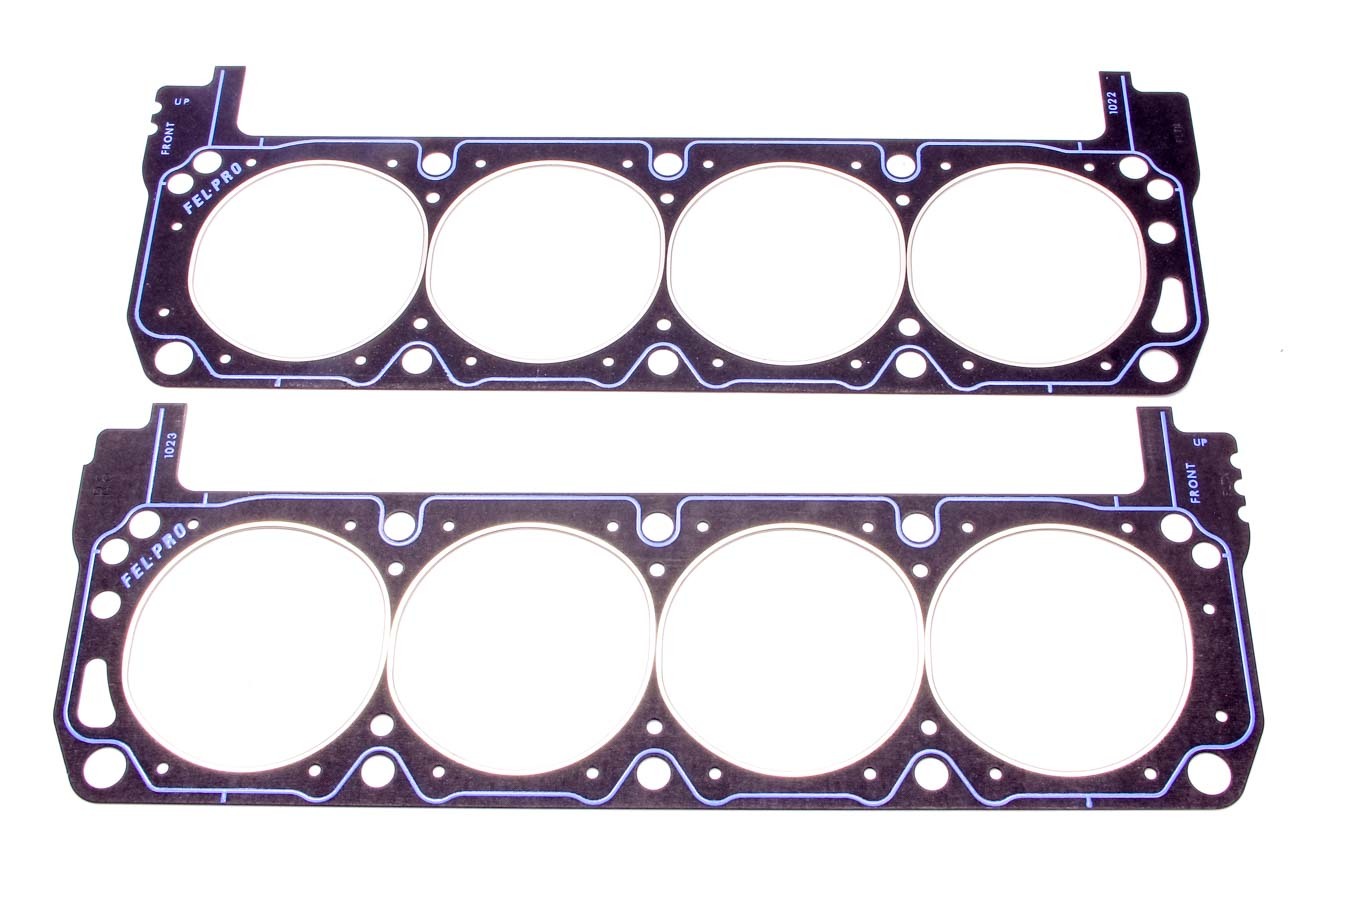 Ford Performance M6051-B341 Cylinder Head Gasket, 4.125 in Bore, 0.040 in Compression Thickness, Steel Core Laminate, Small Block Ford, Pair